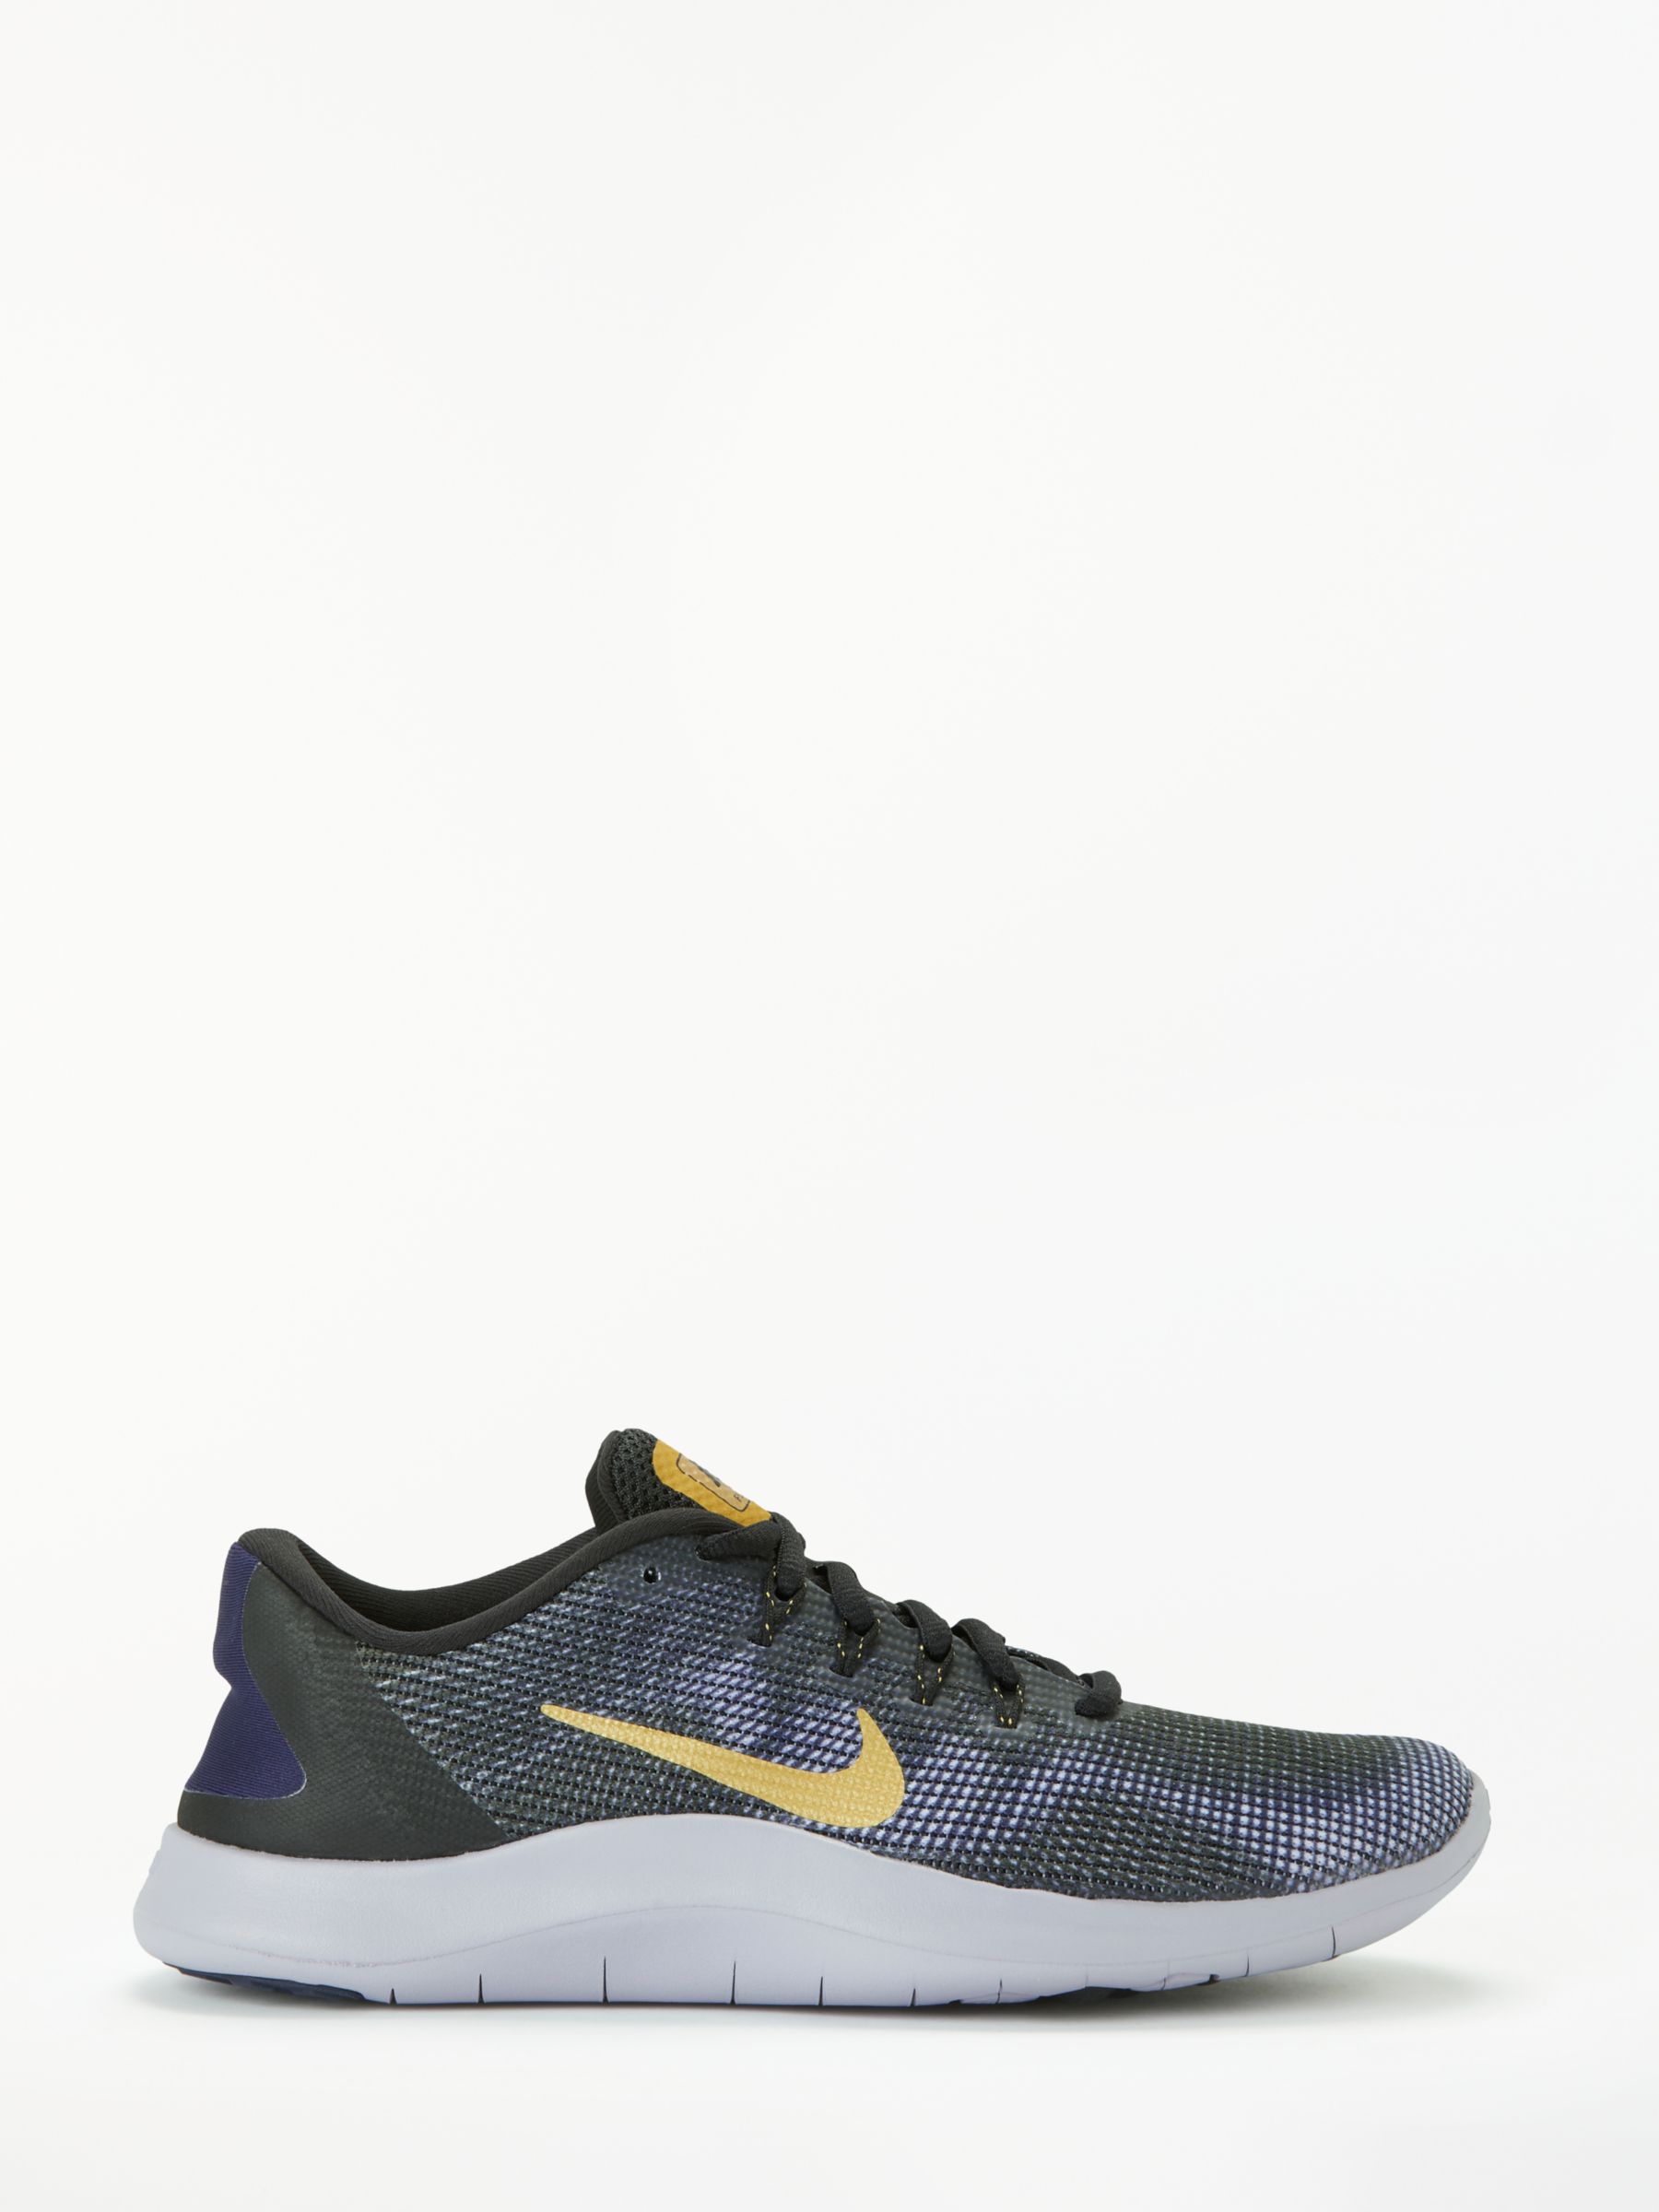 nike trainers black and gold